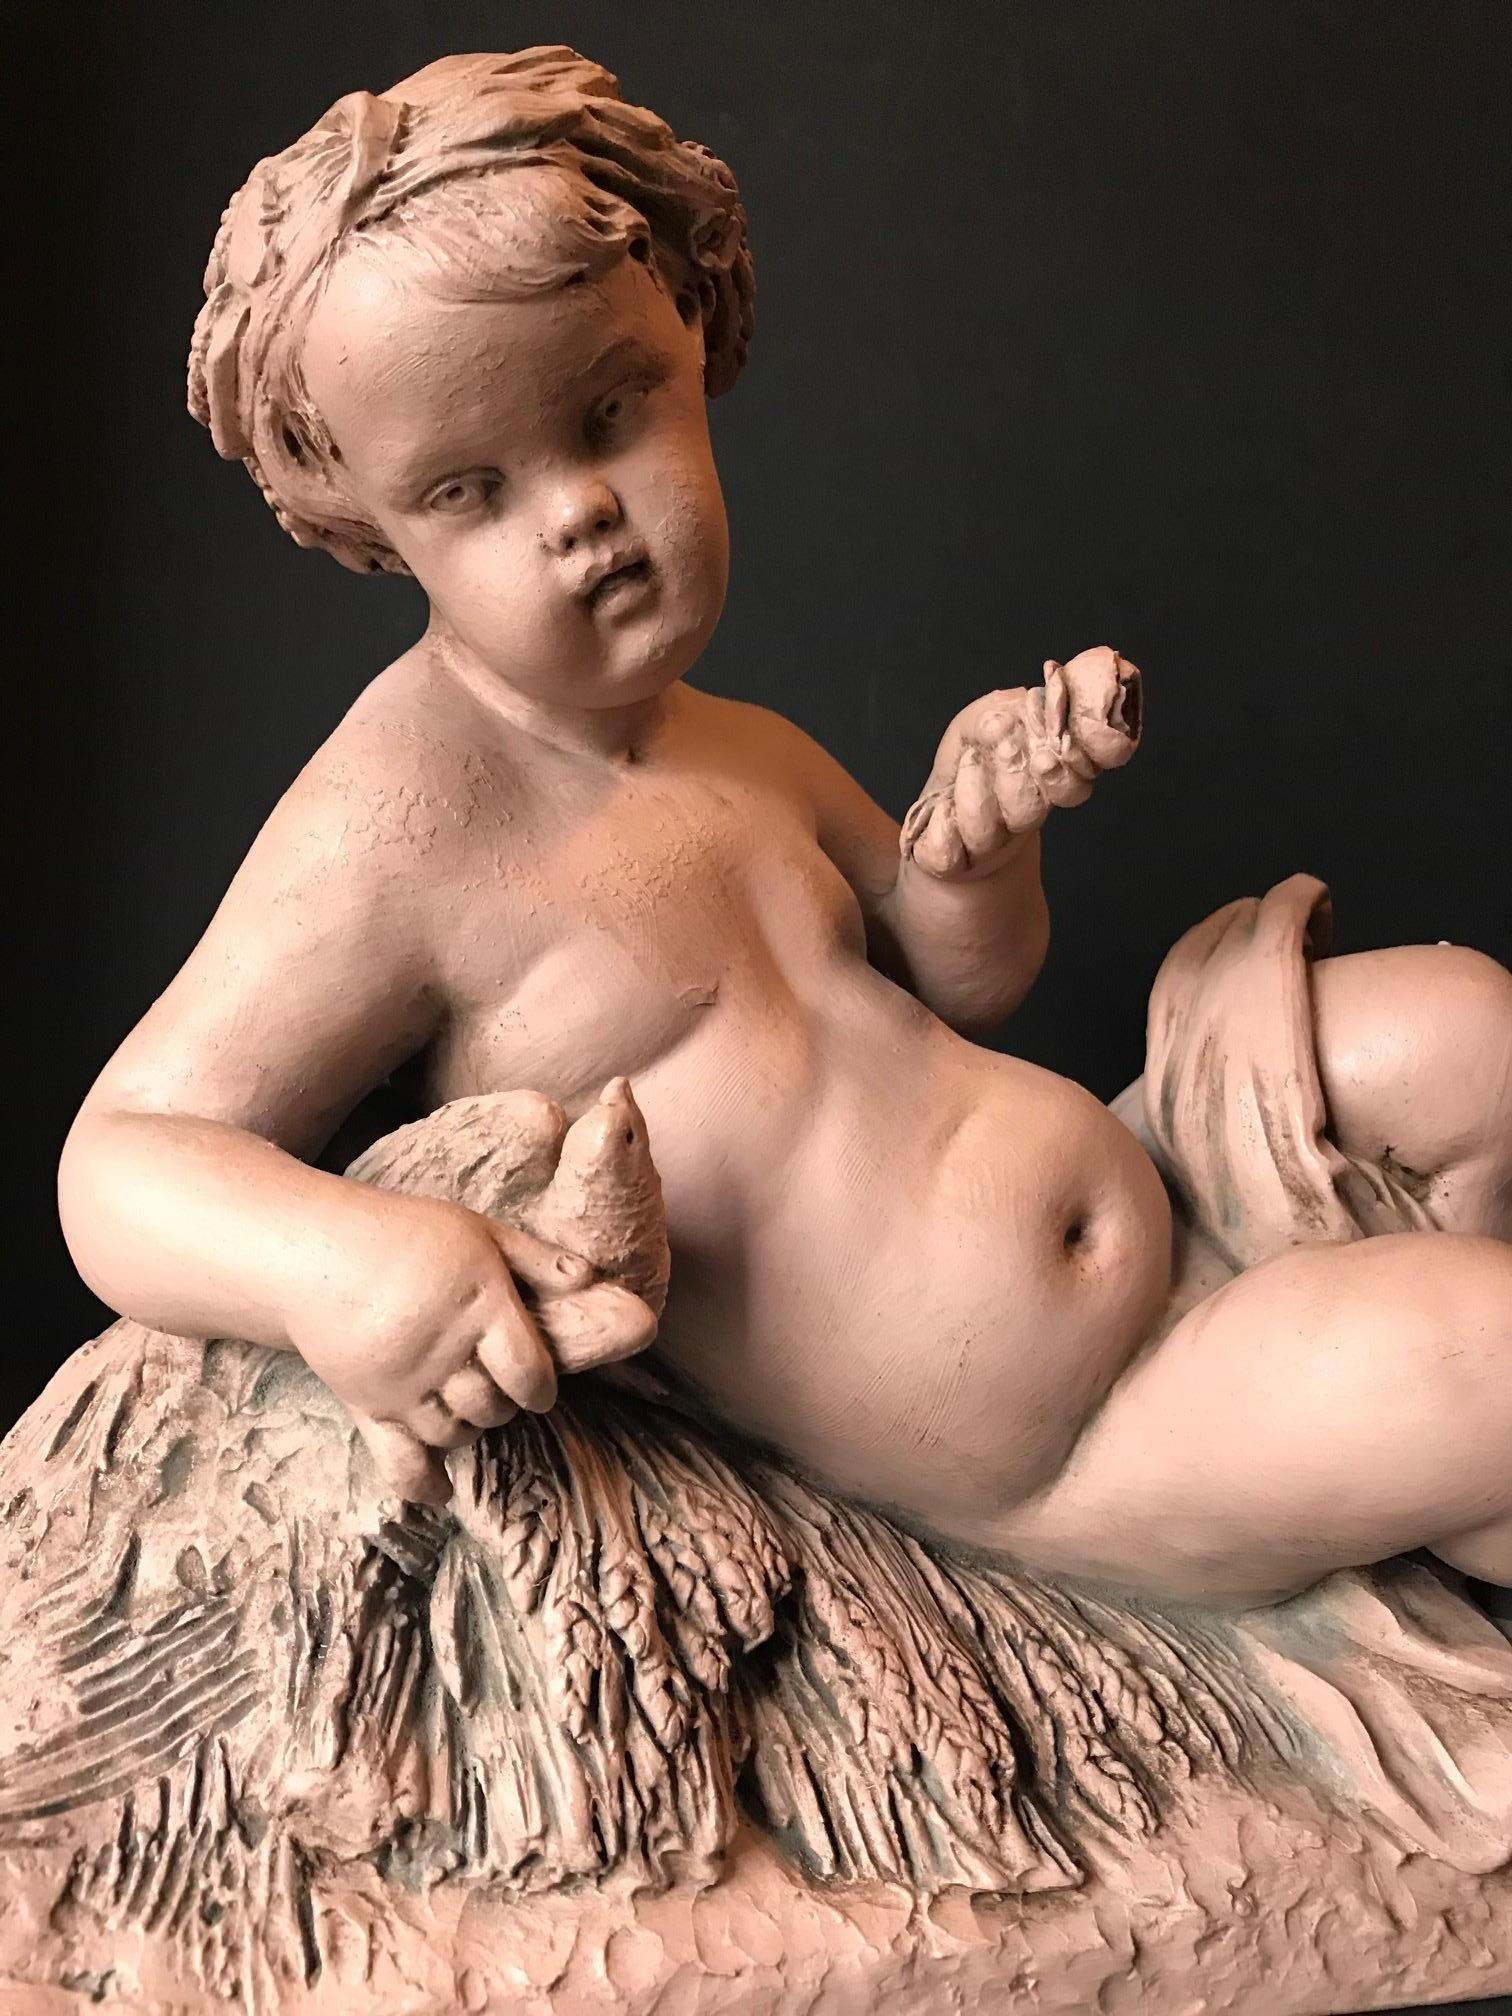 This 19th century terracotta sculpture of a putto feeding a bird is by Albert - Ernest Carrier - Belleuse (1824 - 1887). The terracotta is signed 